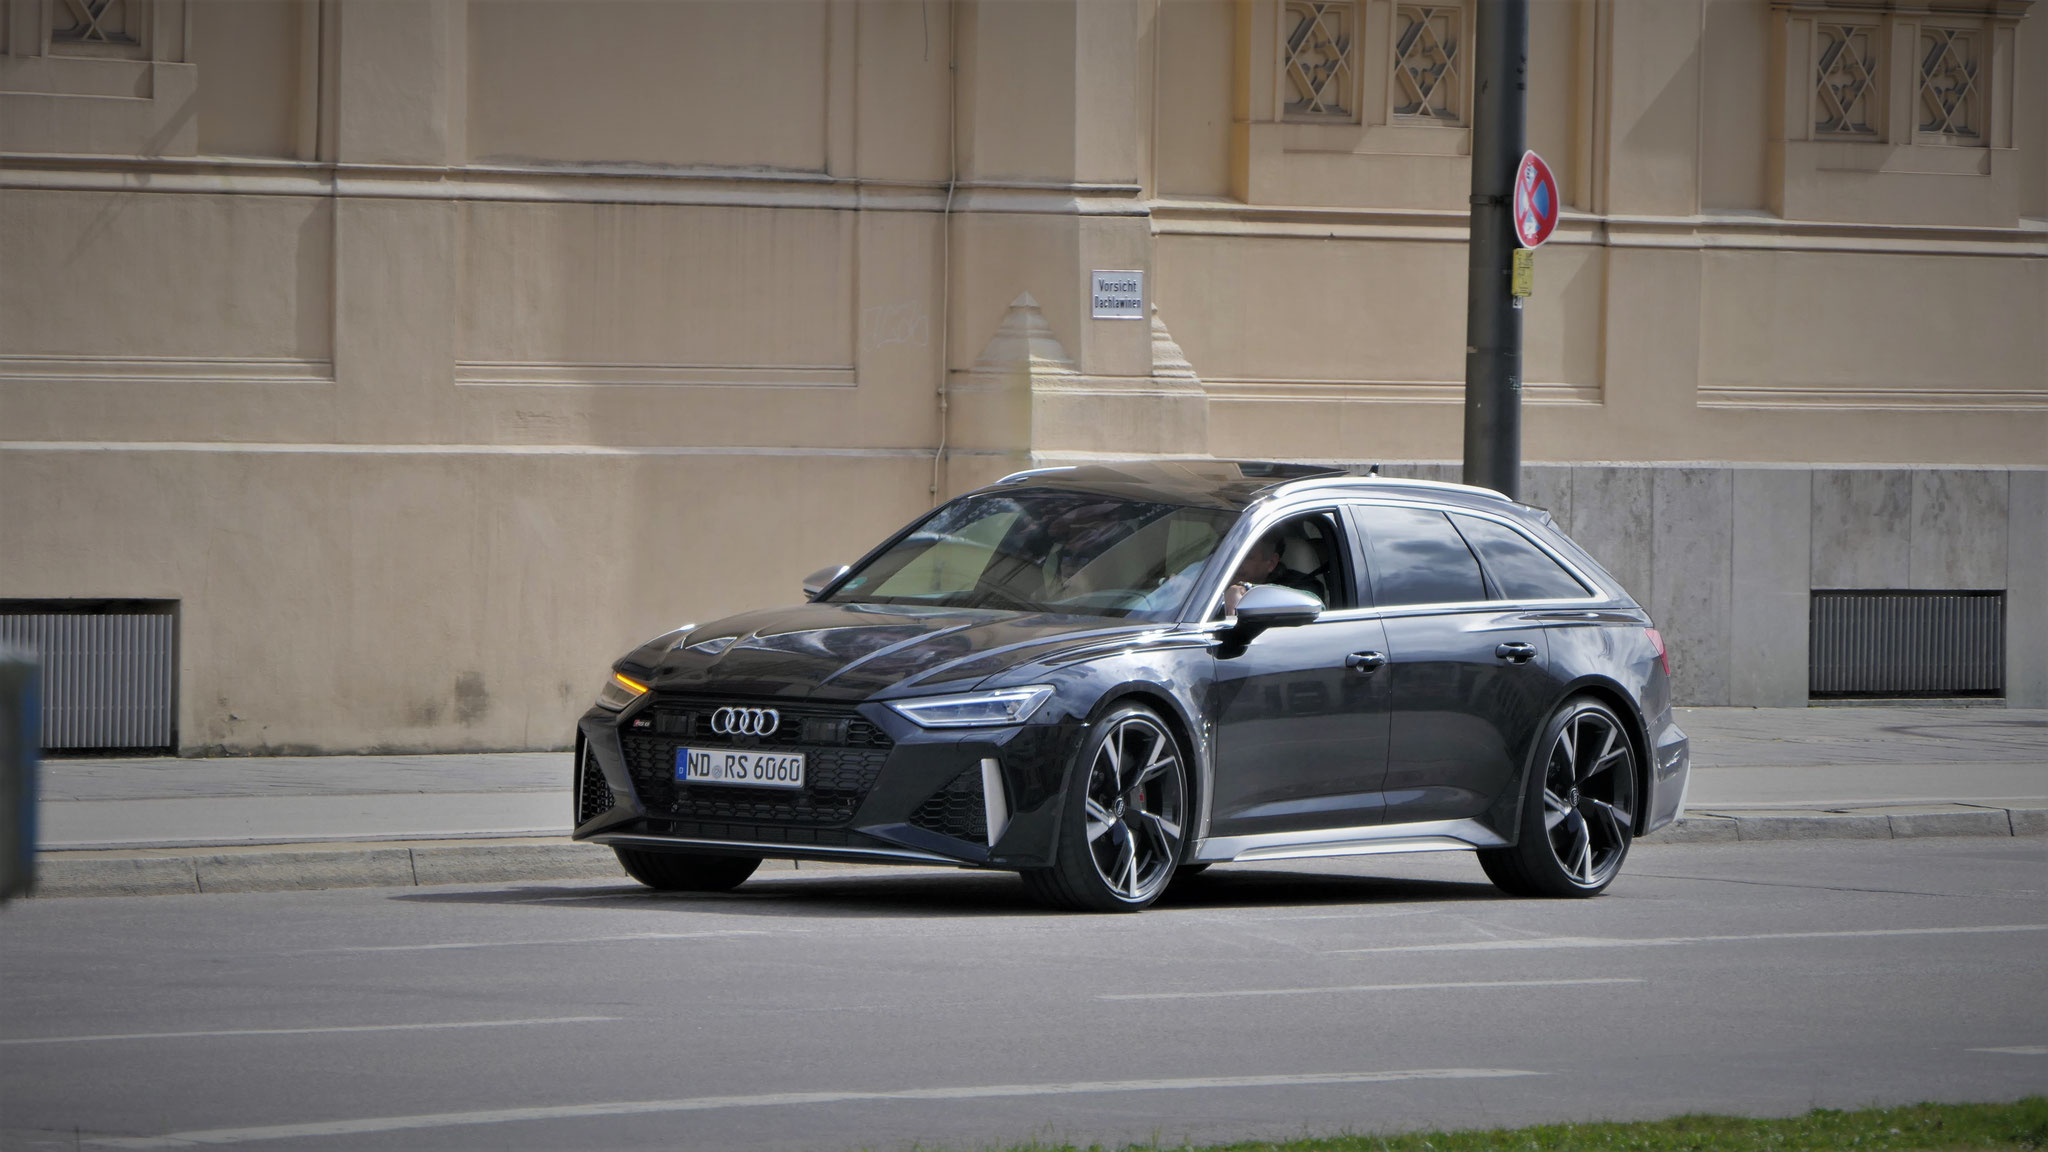 Audi RS6 - ND-RS-6060